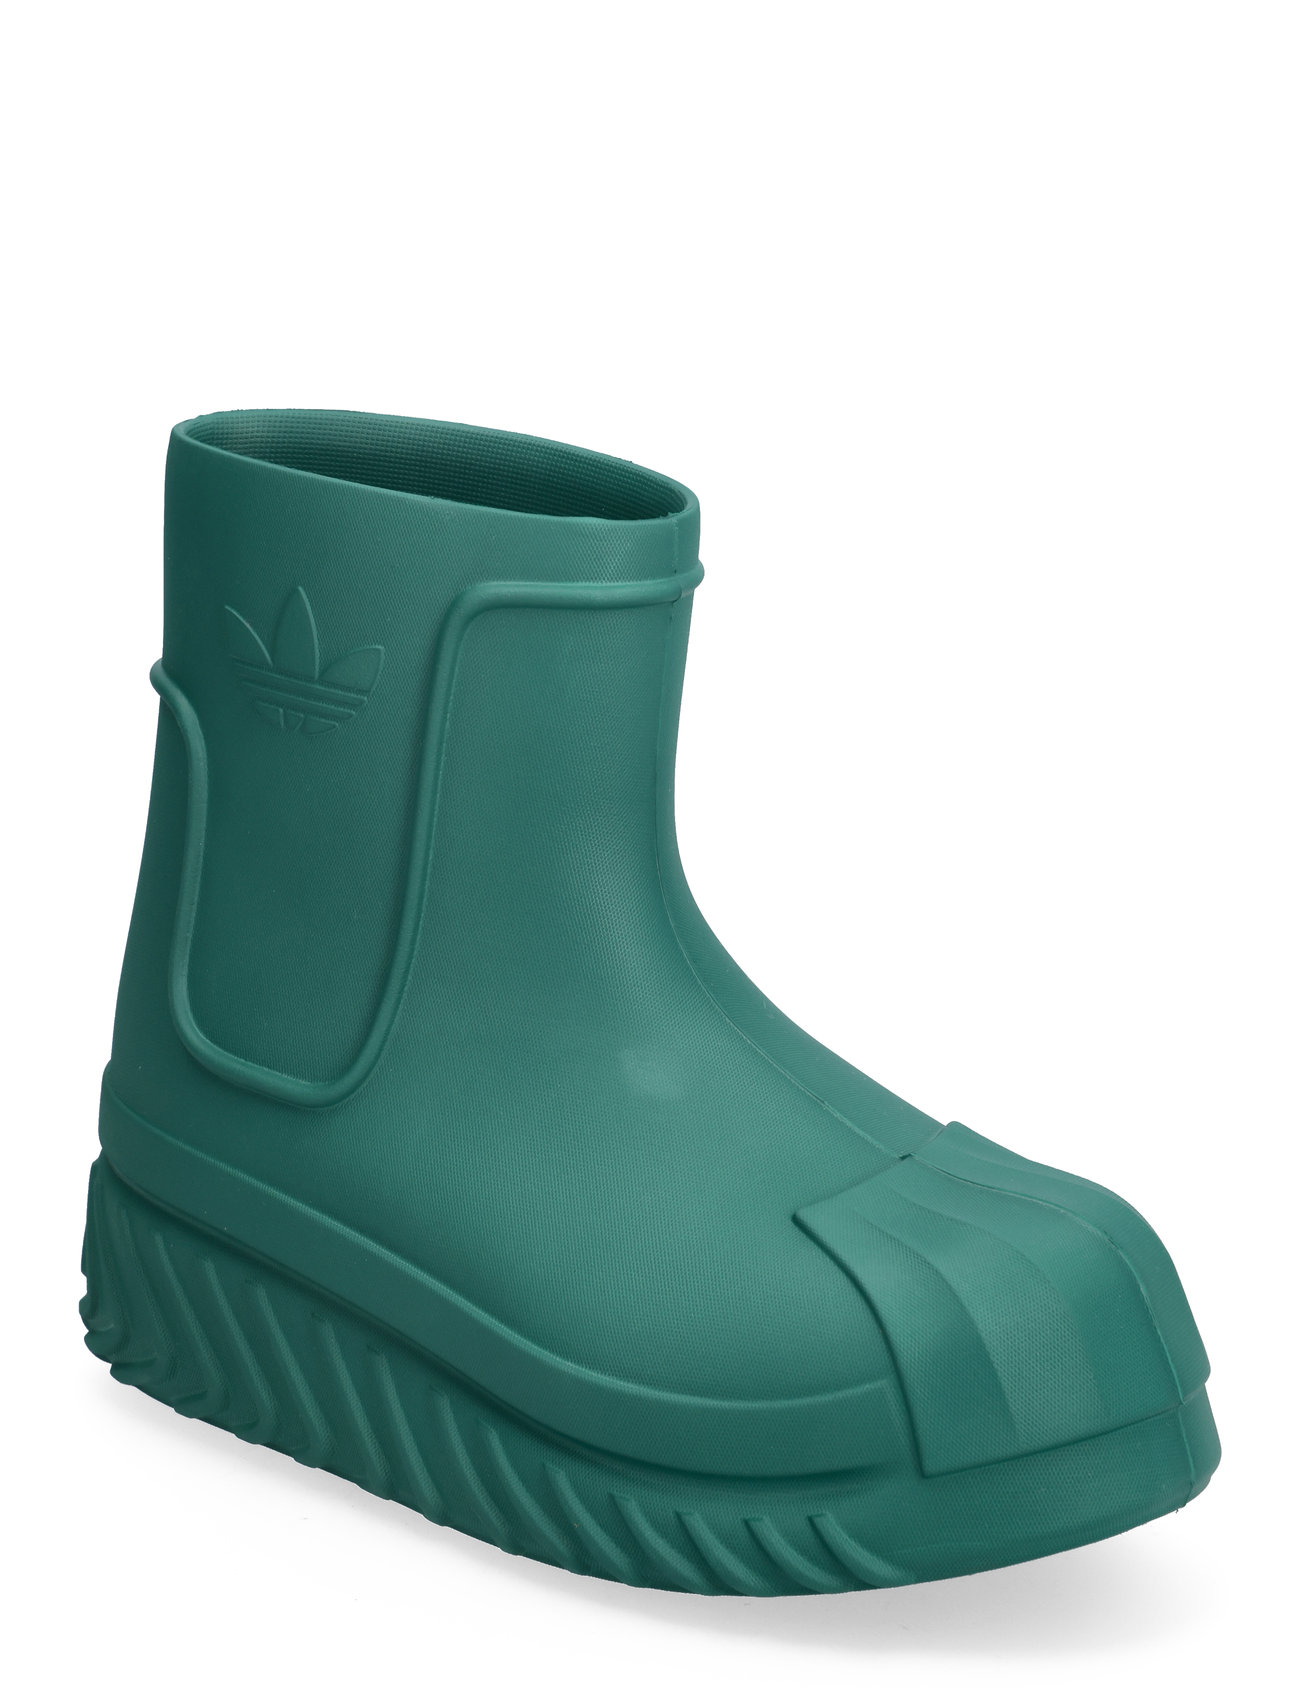 Adifom Superstar Boot W Sport Boots Ankle Boots Green Adidas Originals